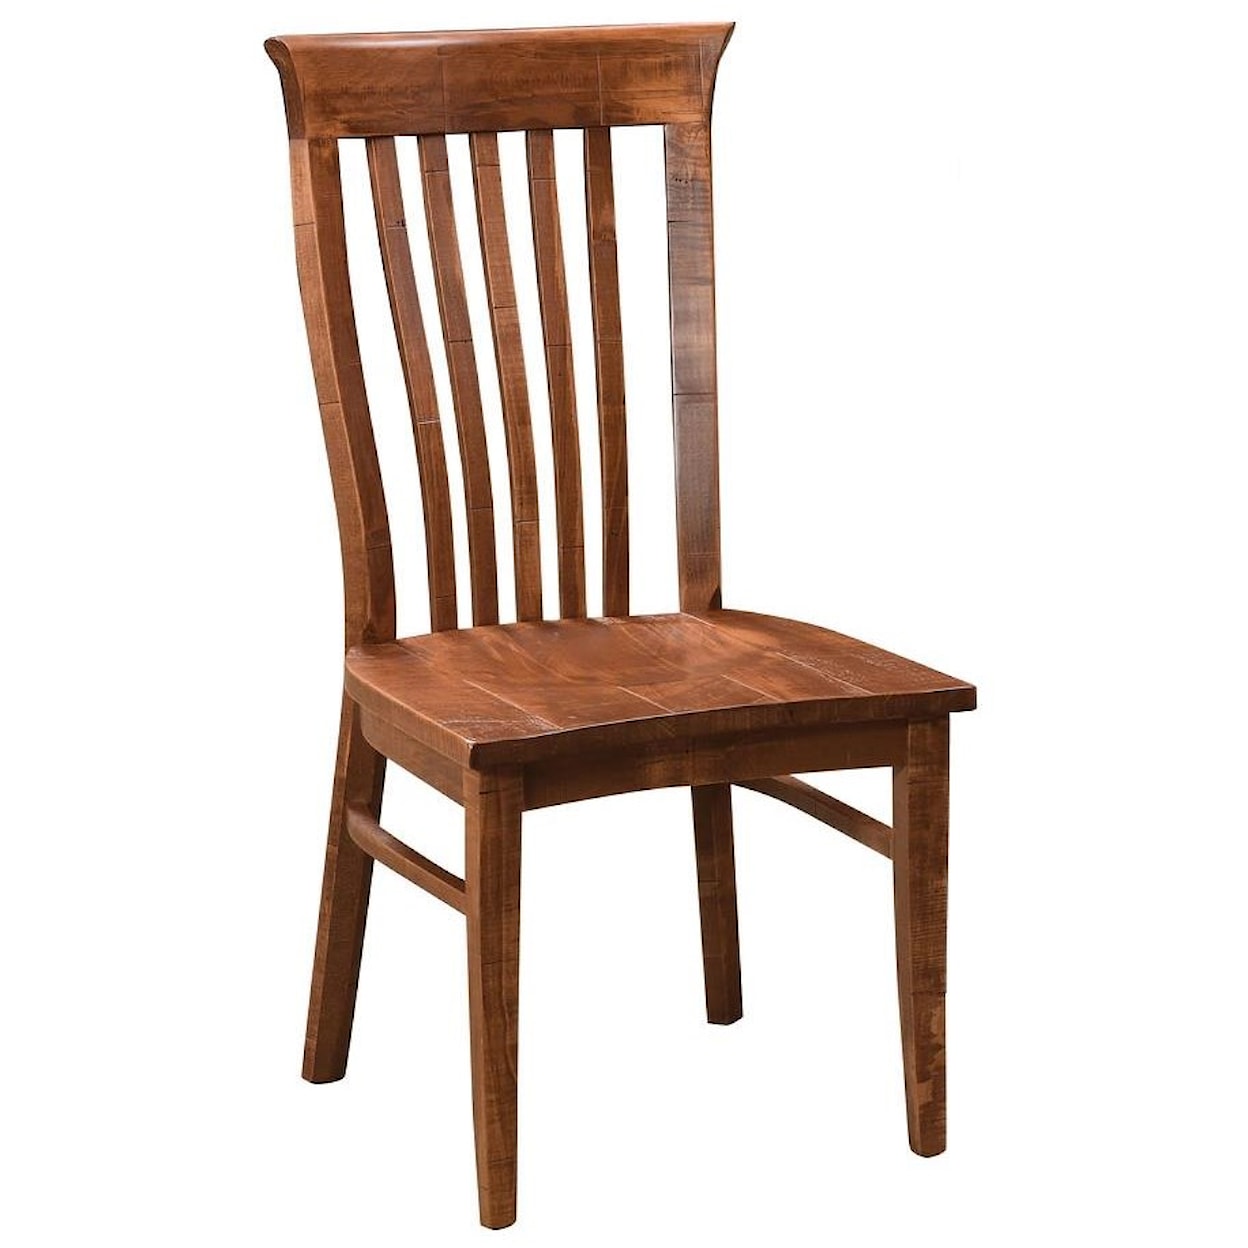 Country Comfort Woodworking Danbury Side Chair